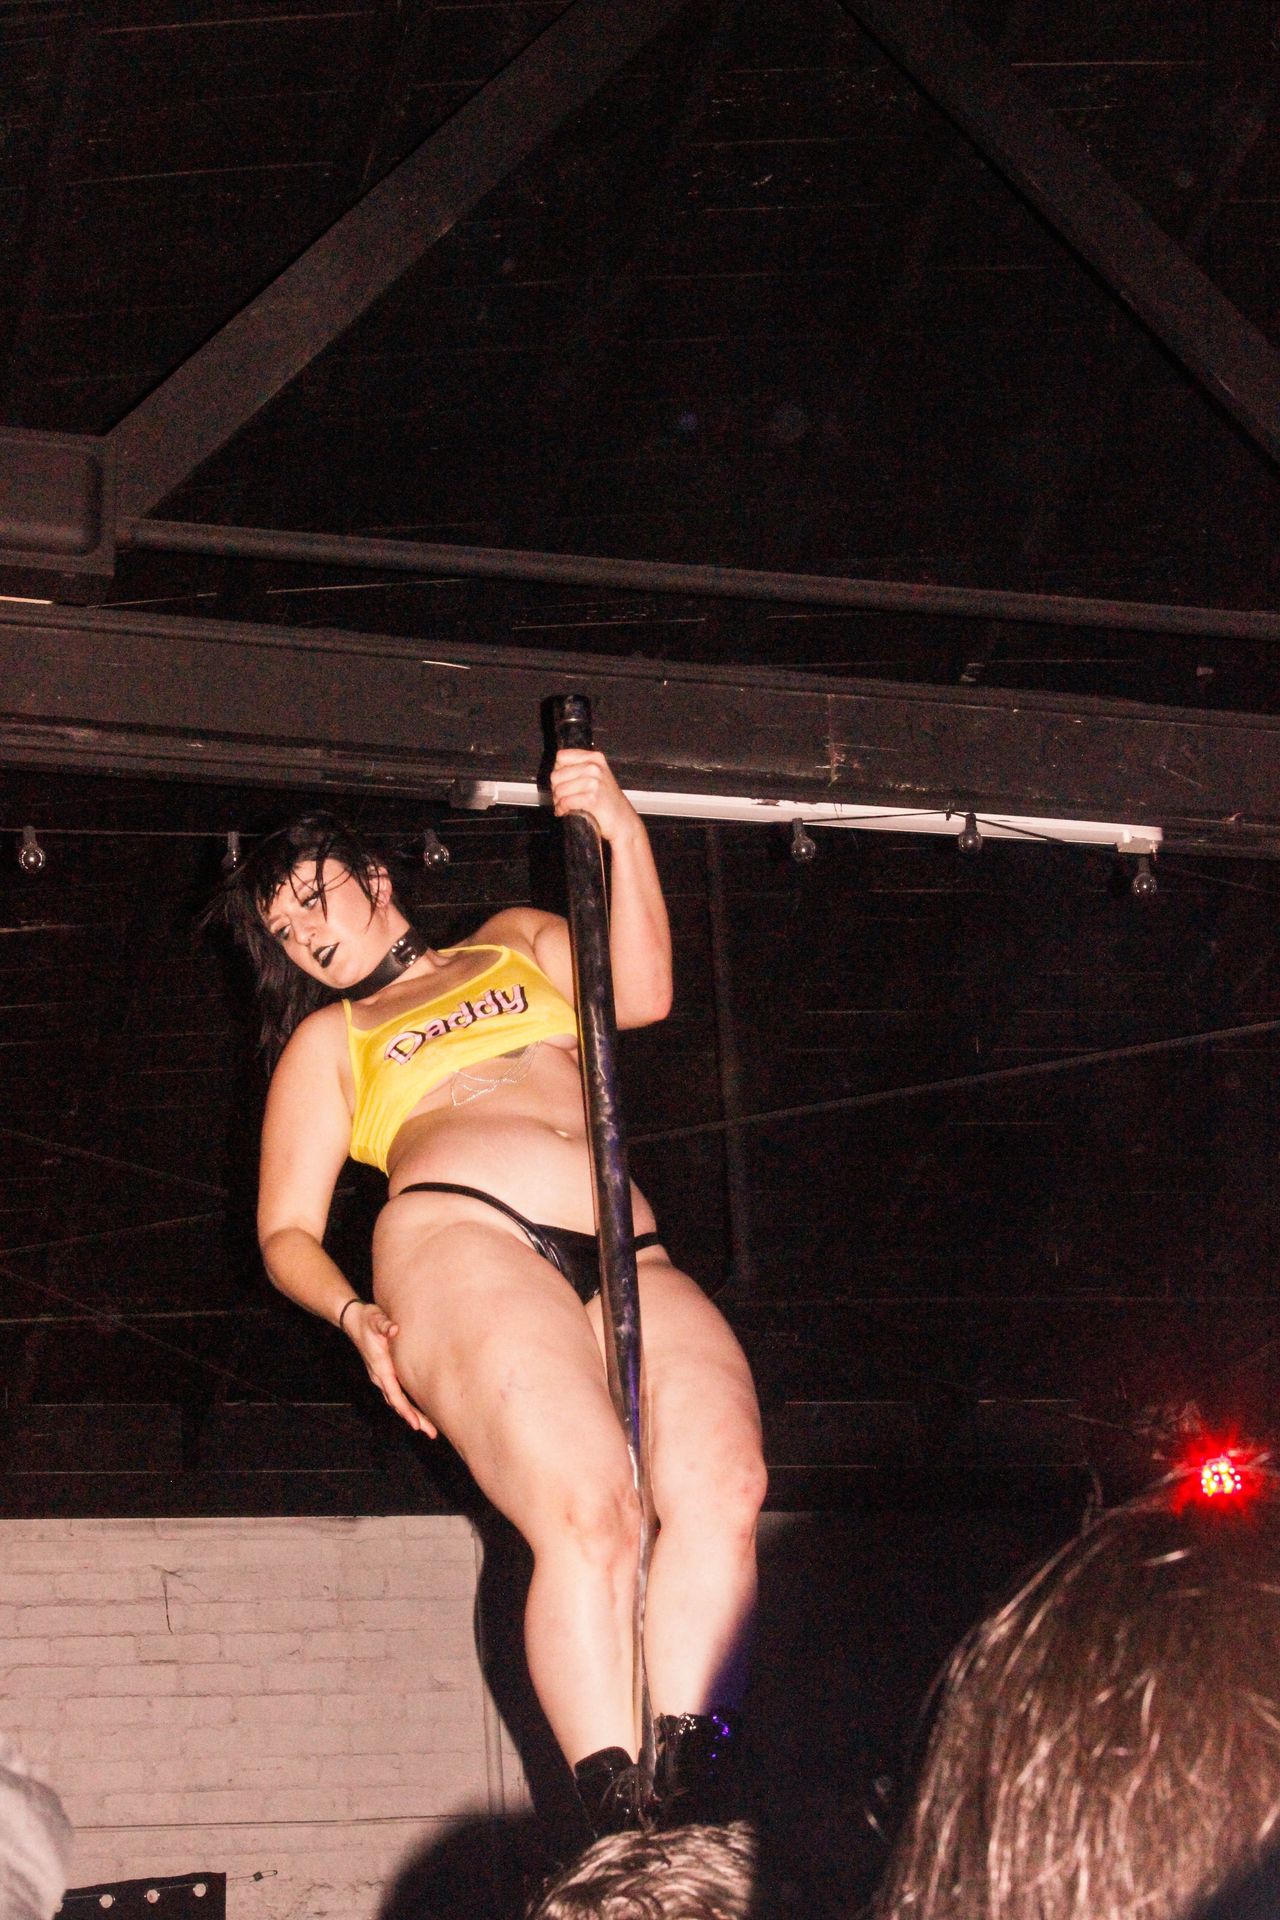  Marie Rolla dances during her set at Thicc Strip.